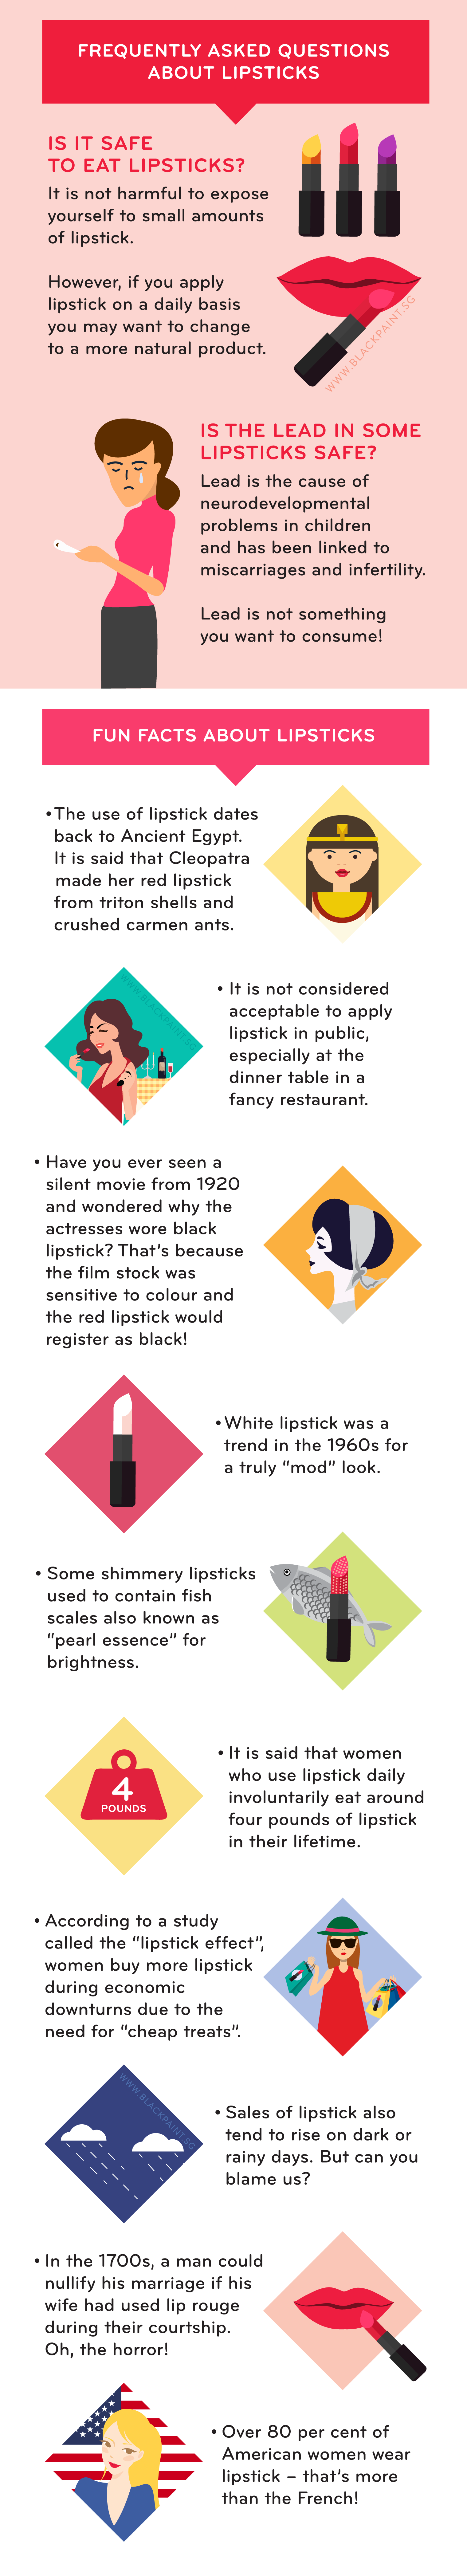 facts about lipsticks that we should know